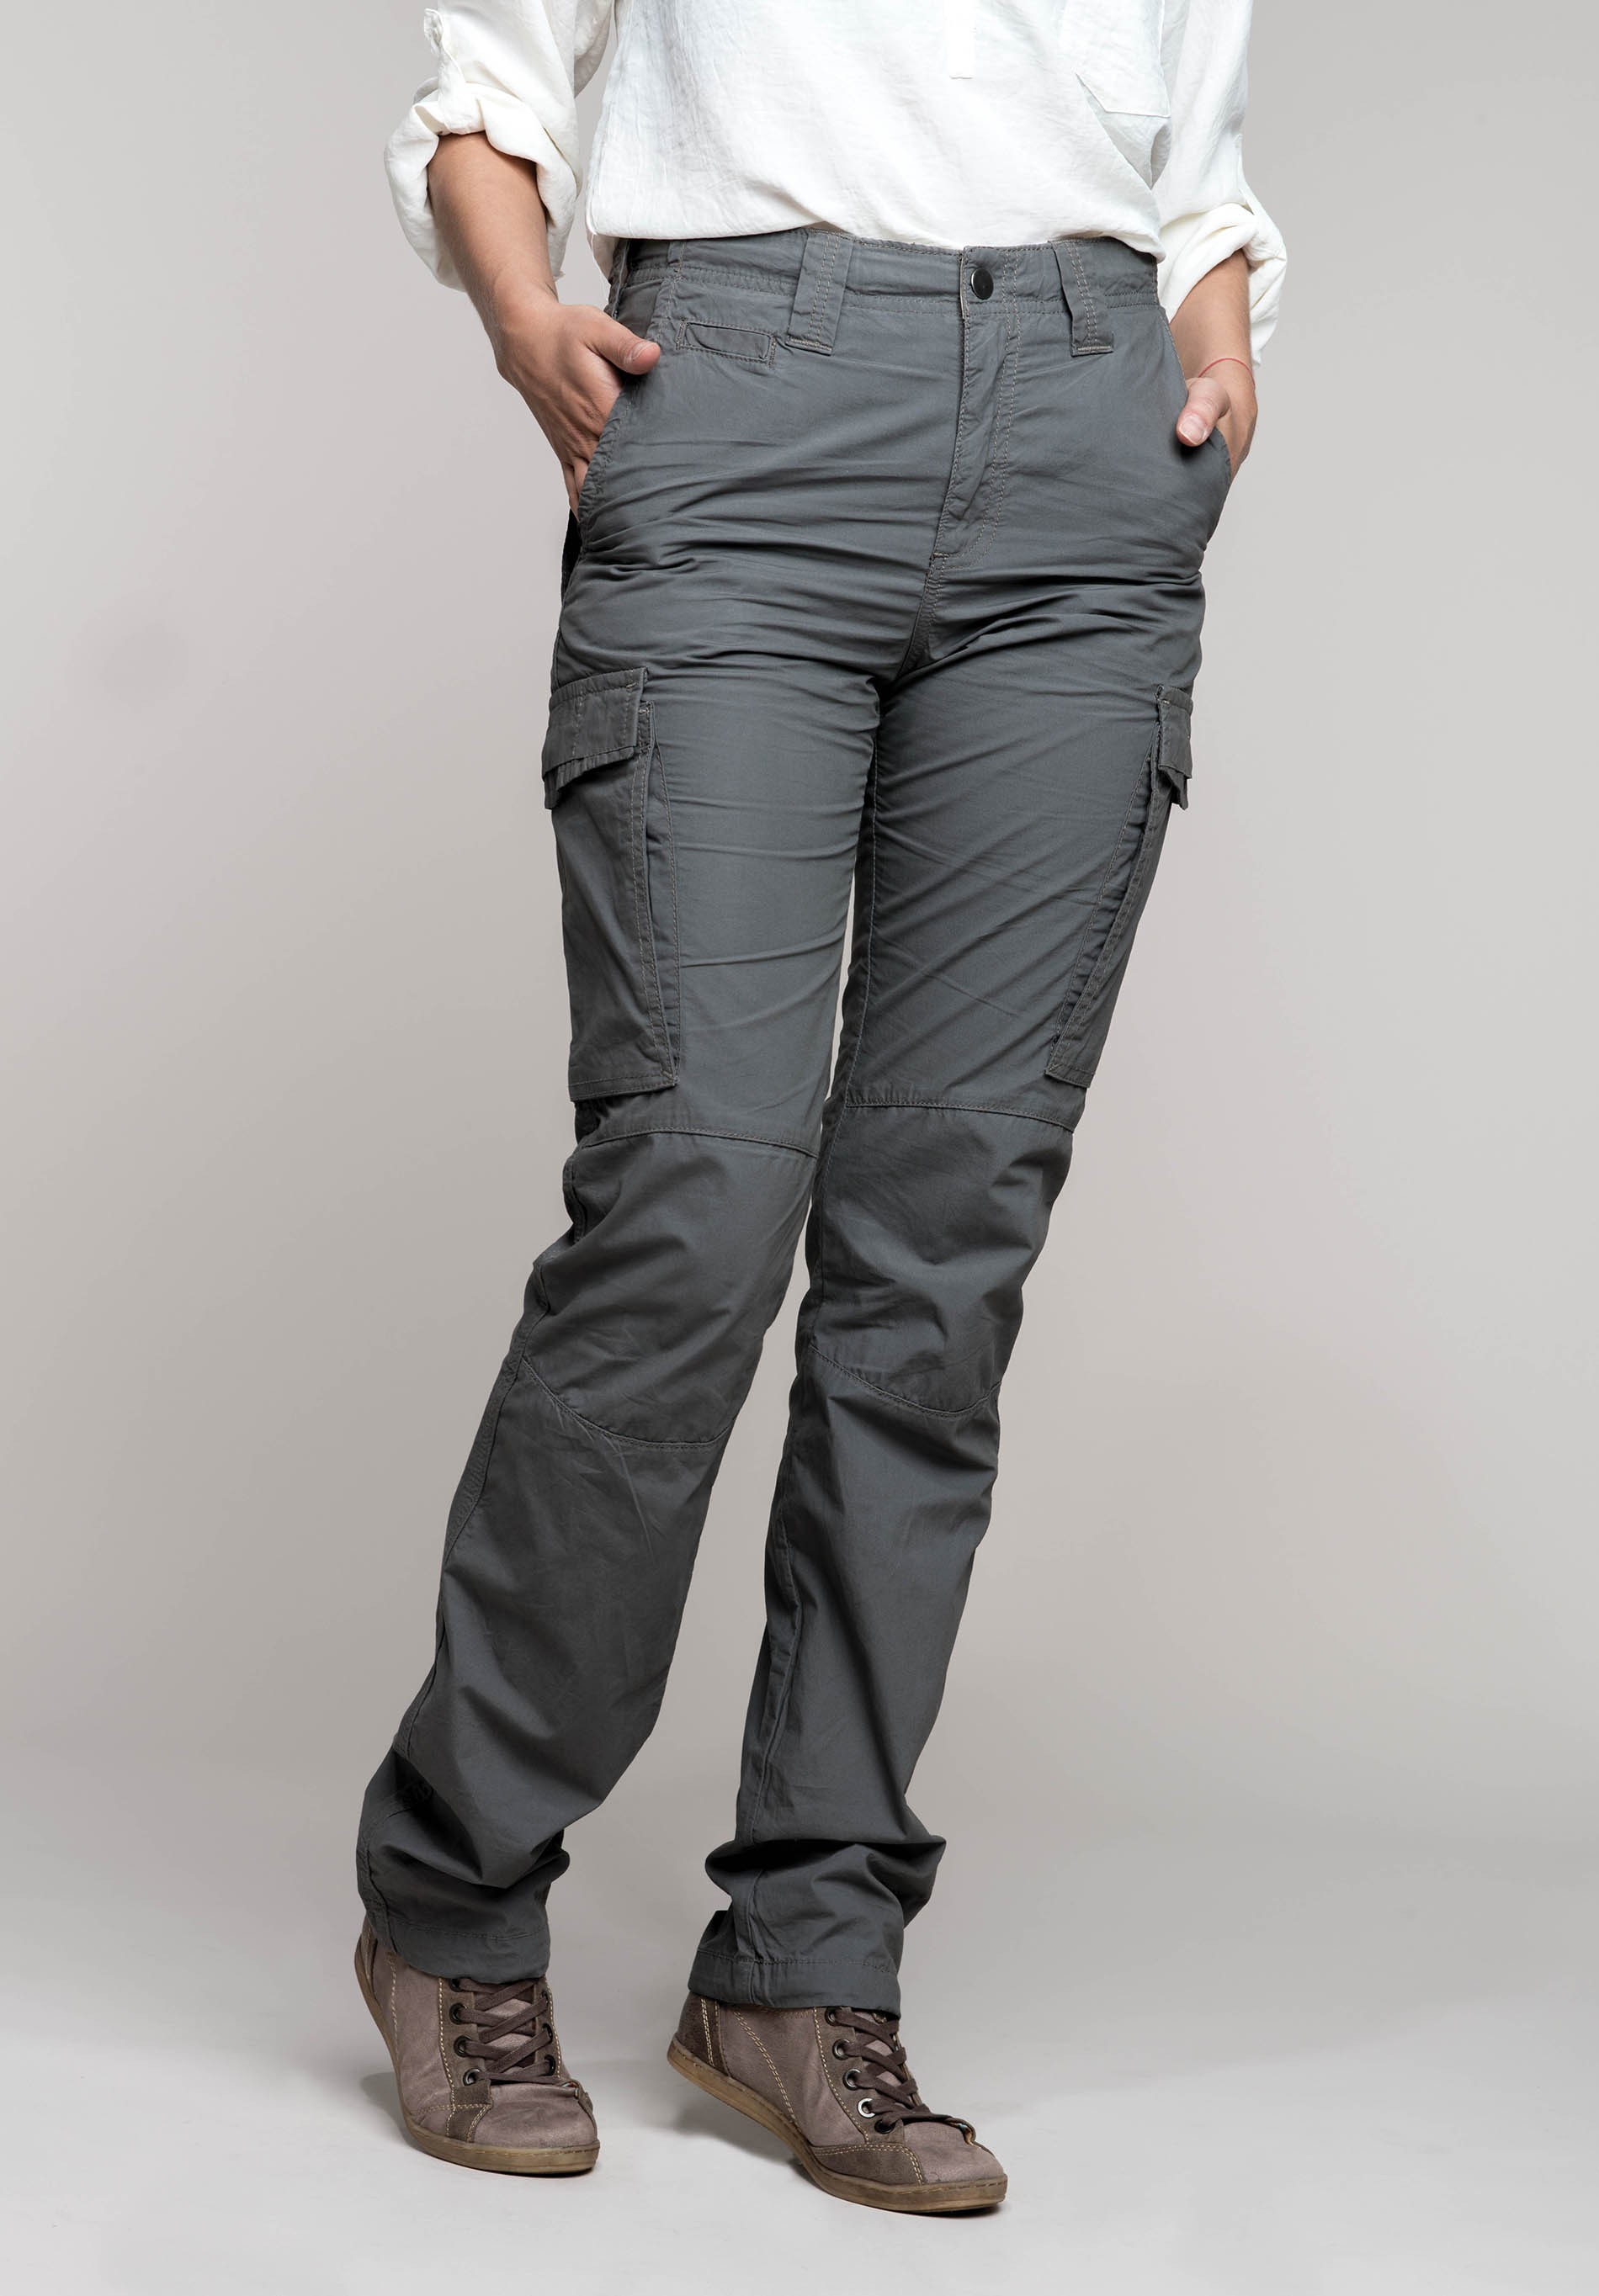 Cargo Pant Outfits 2023  How to Wear Cargo Pants